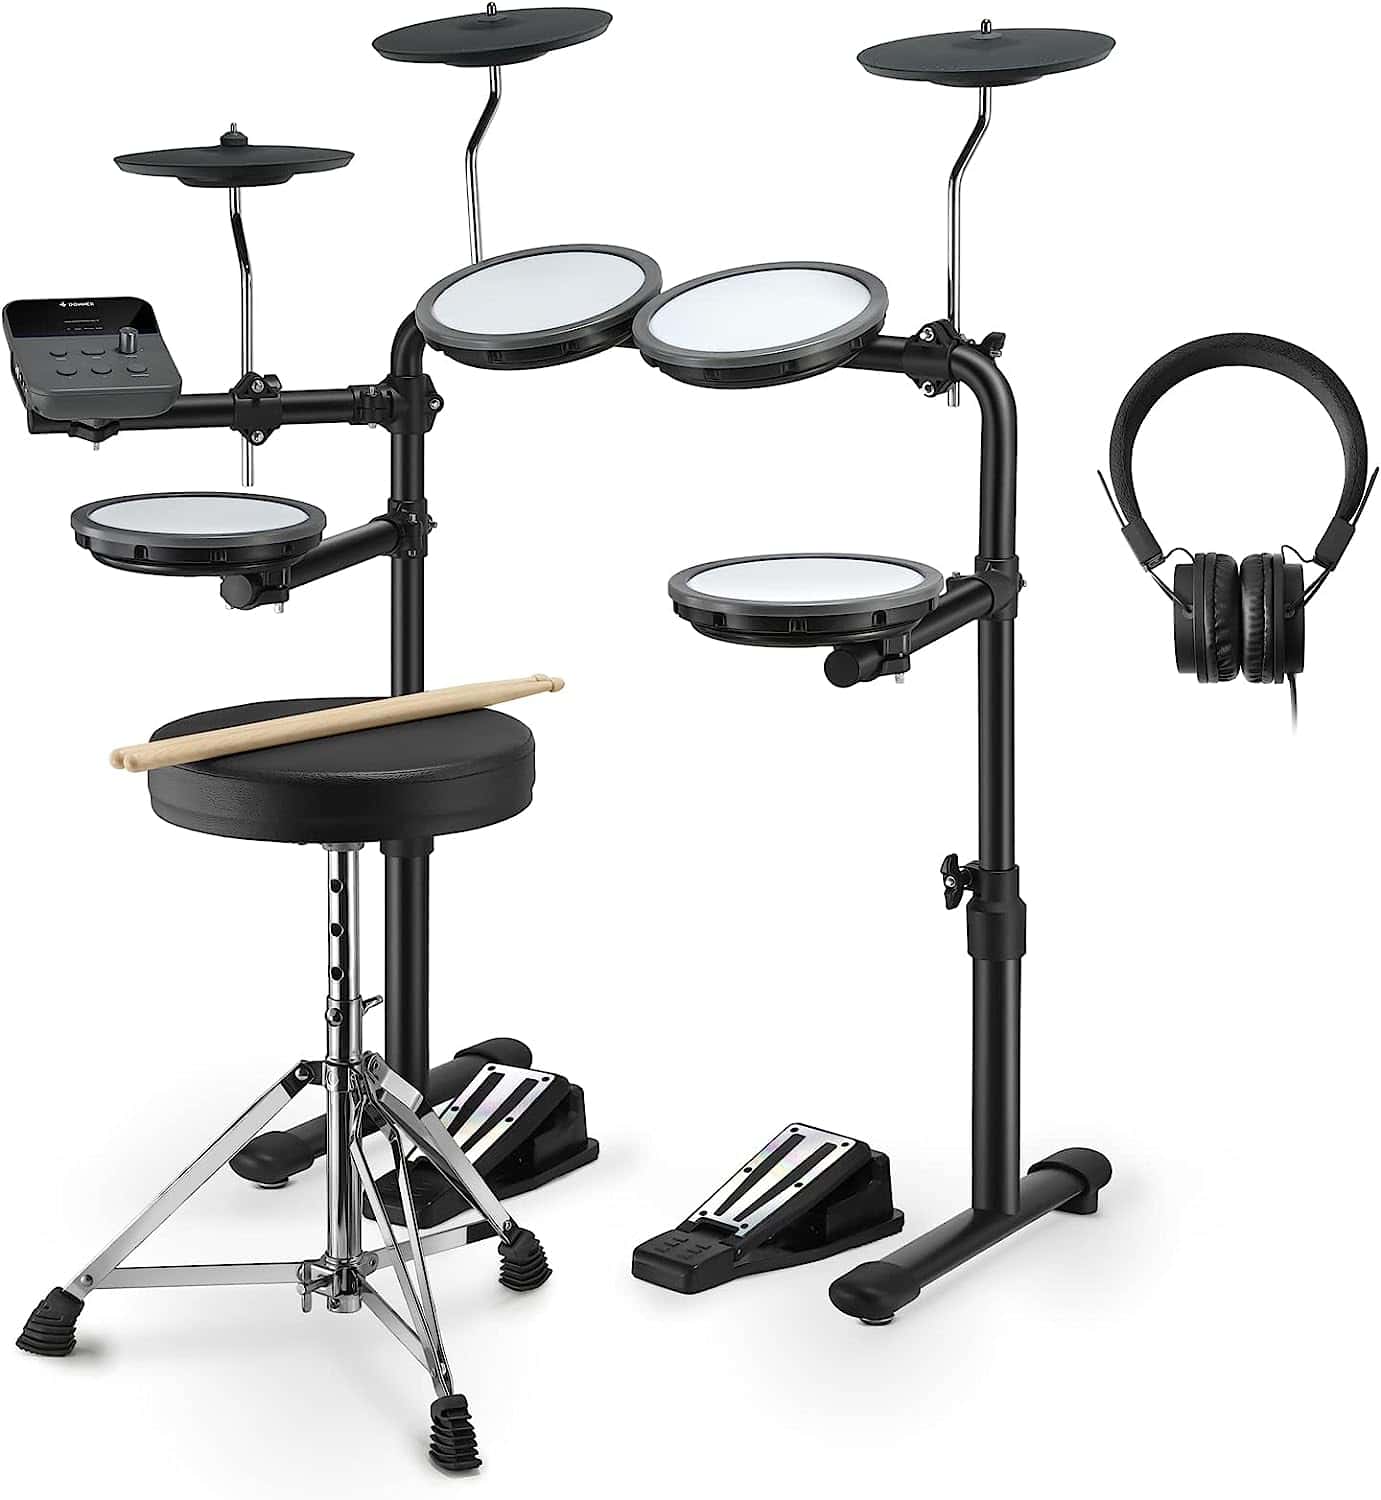 Donner DED-70 Electric Drum Set, Electric Drums with 4 Quiet Mesh Drum Pads, 2 Switch Pedal, Portable and Solid Drum Set with Type-C Charging, 68+ Sounds, Throne, Headphones, Sticks, Melodics Lessons